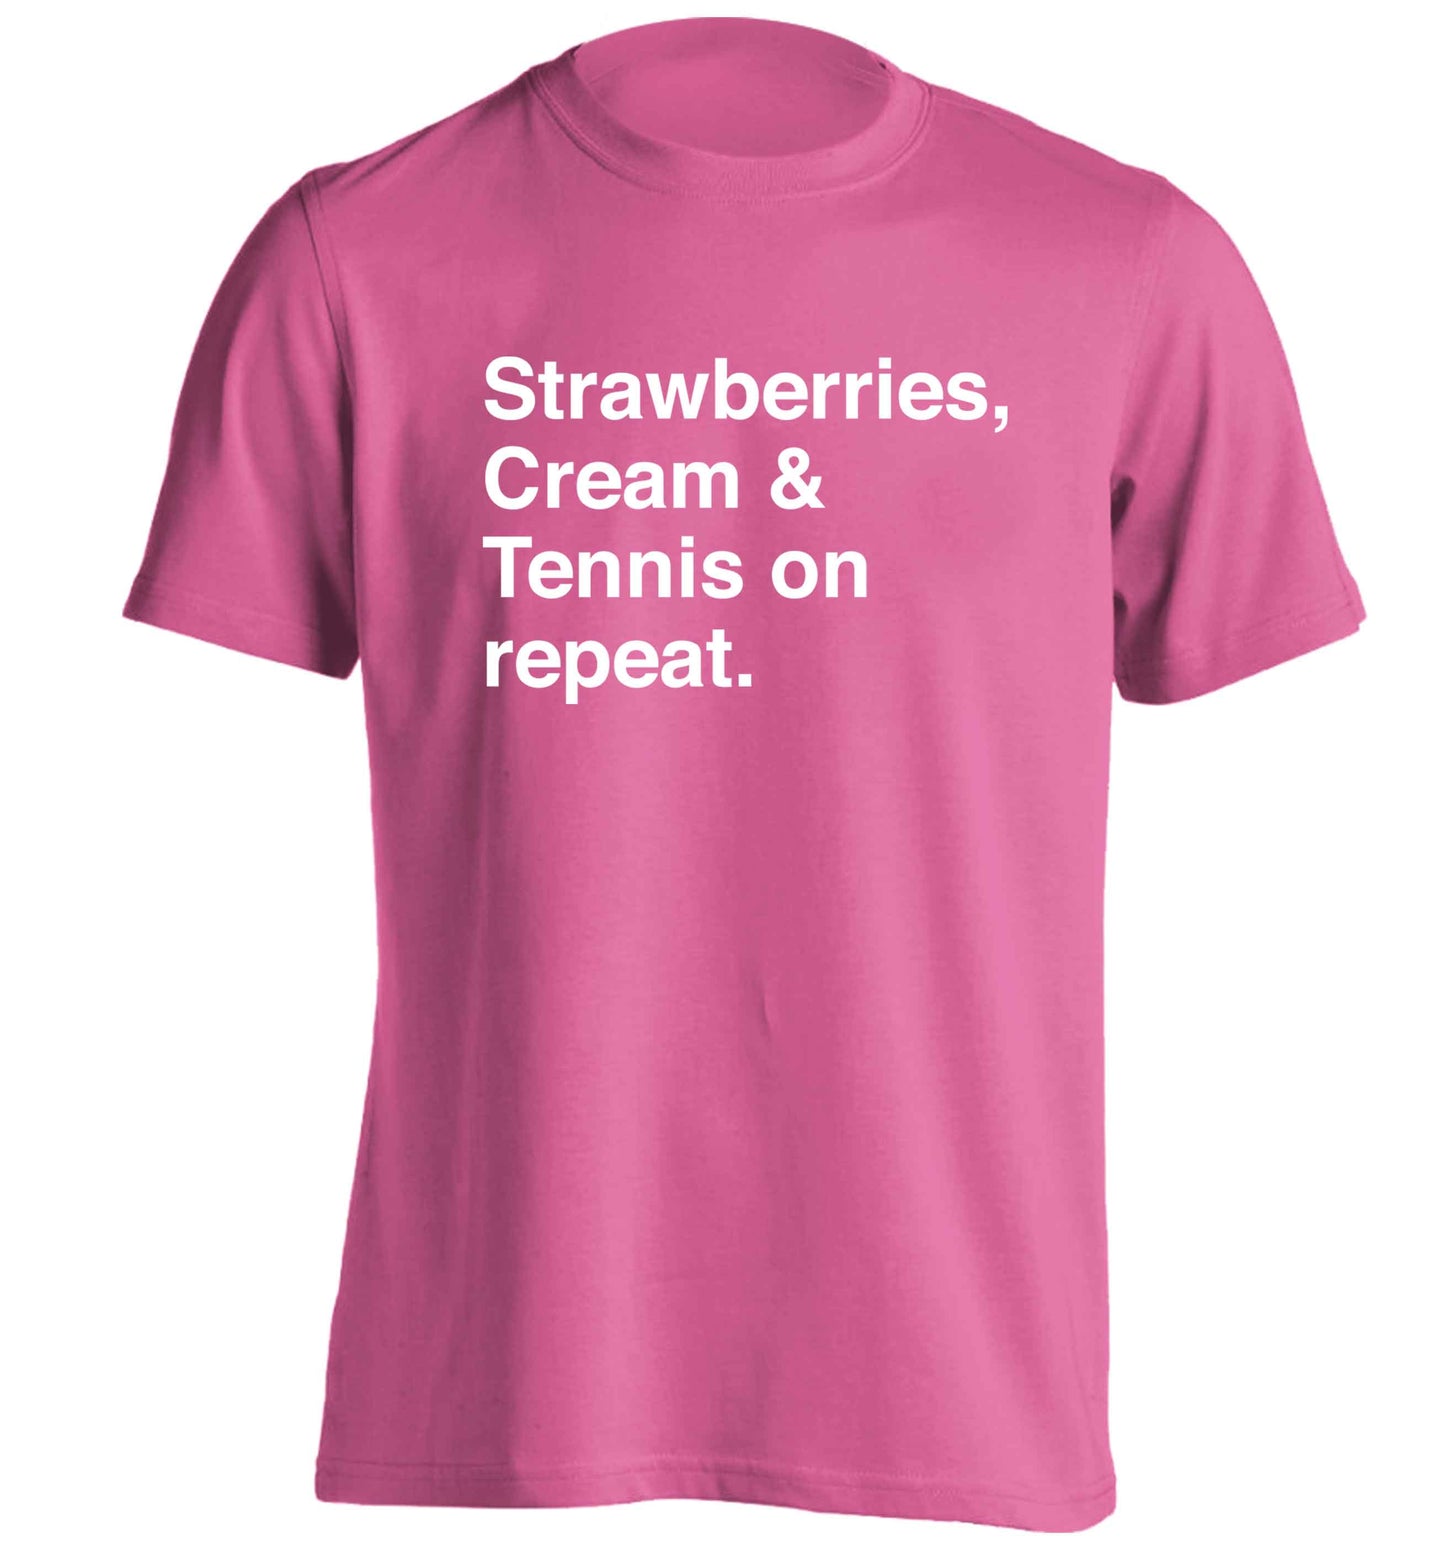 Strawberries, cream and tennis on repeat adults unisex pink Tshirt 2XL